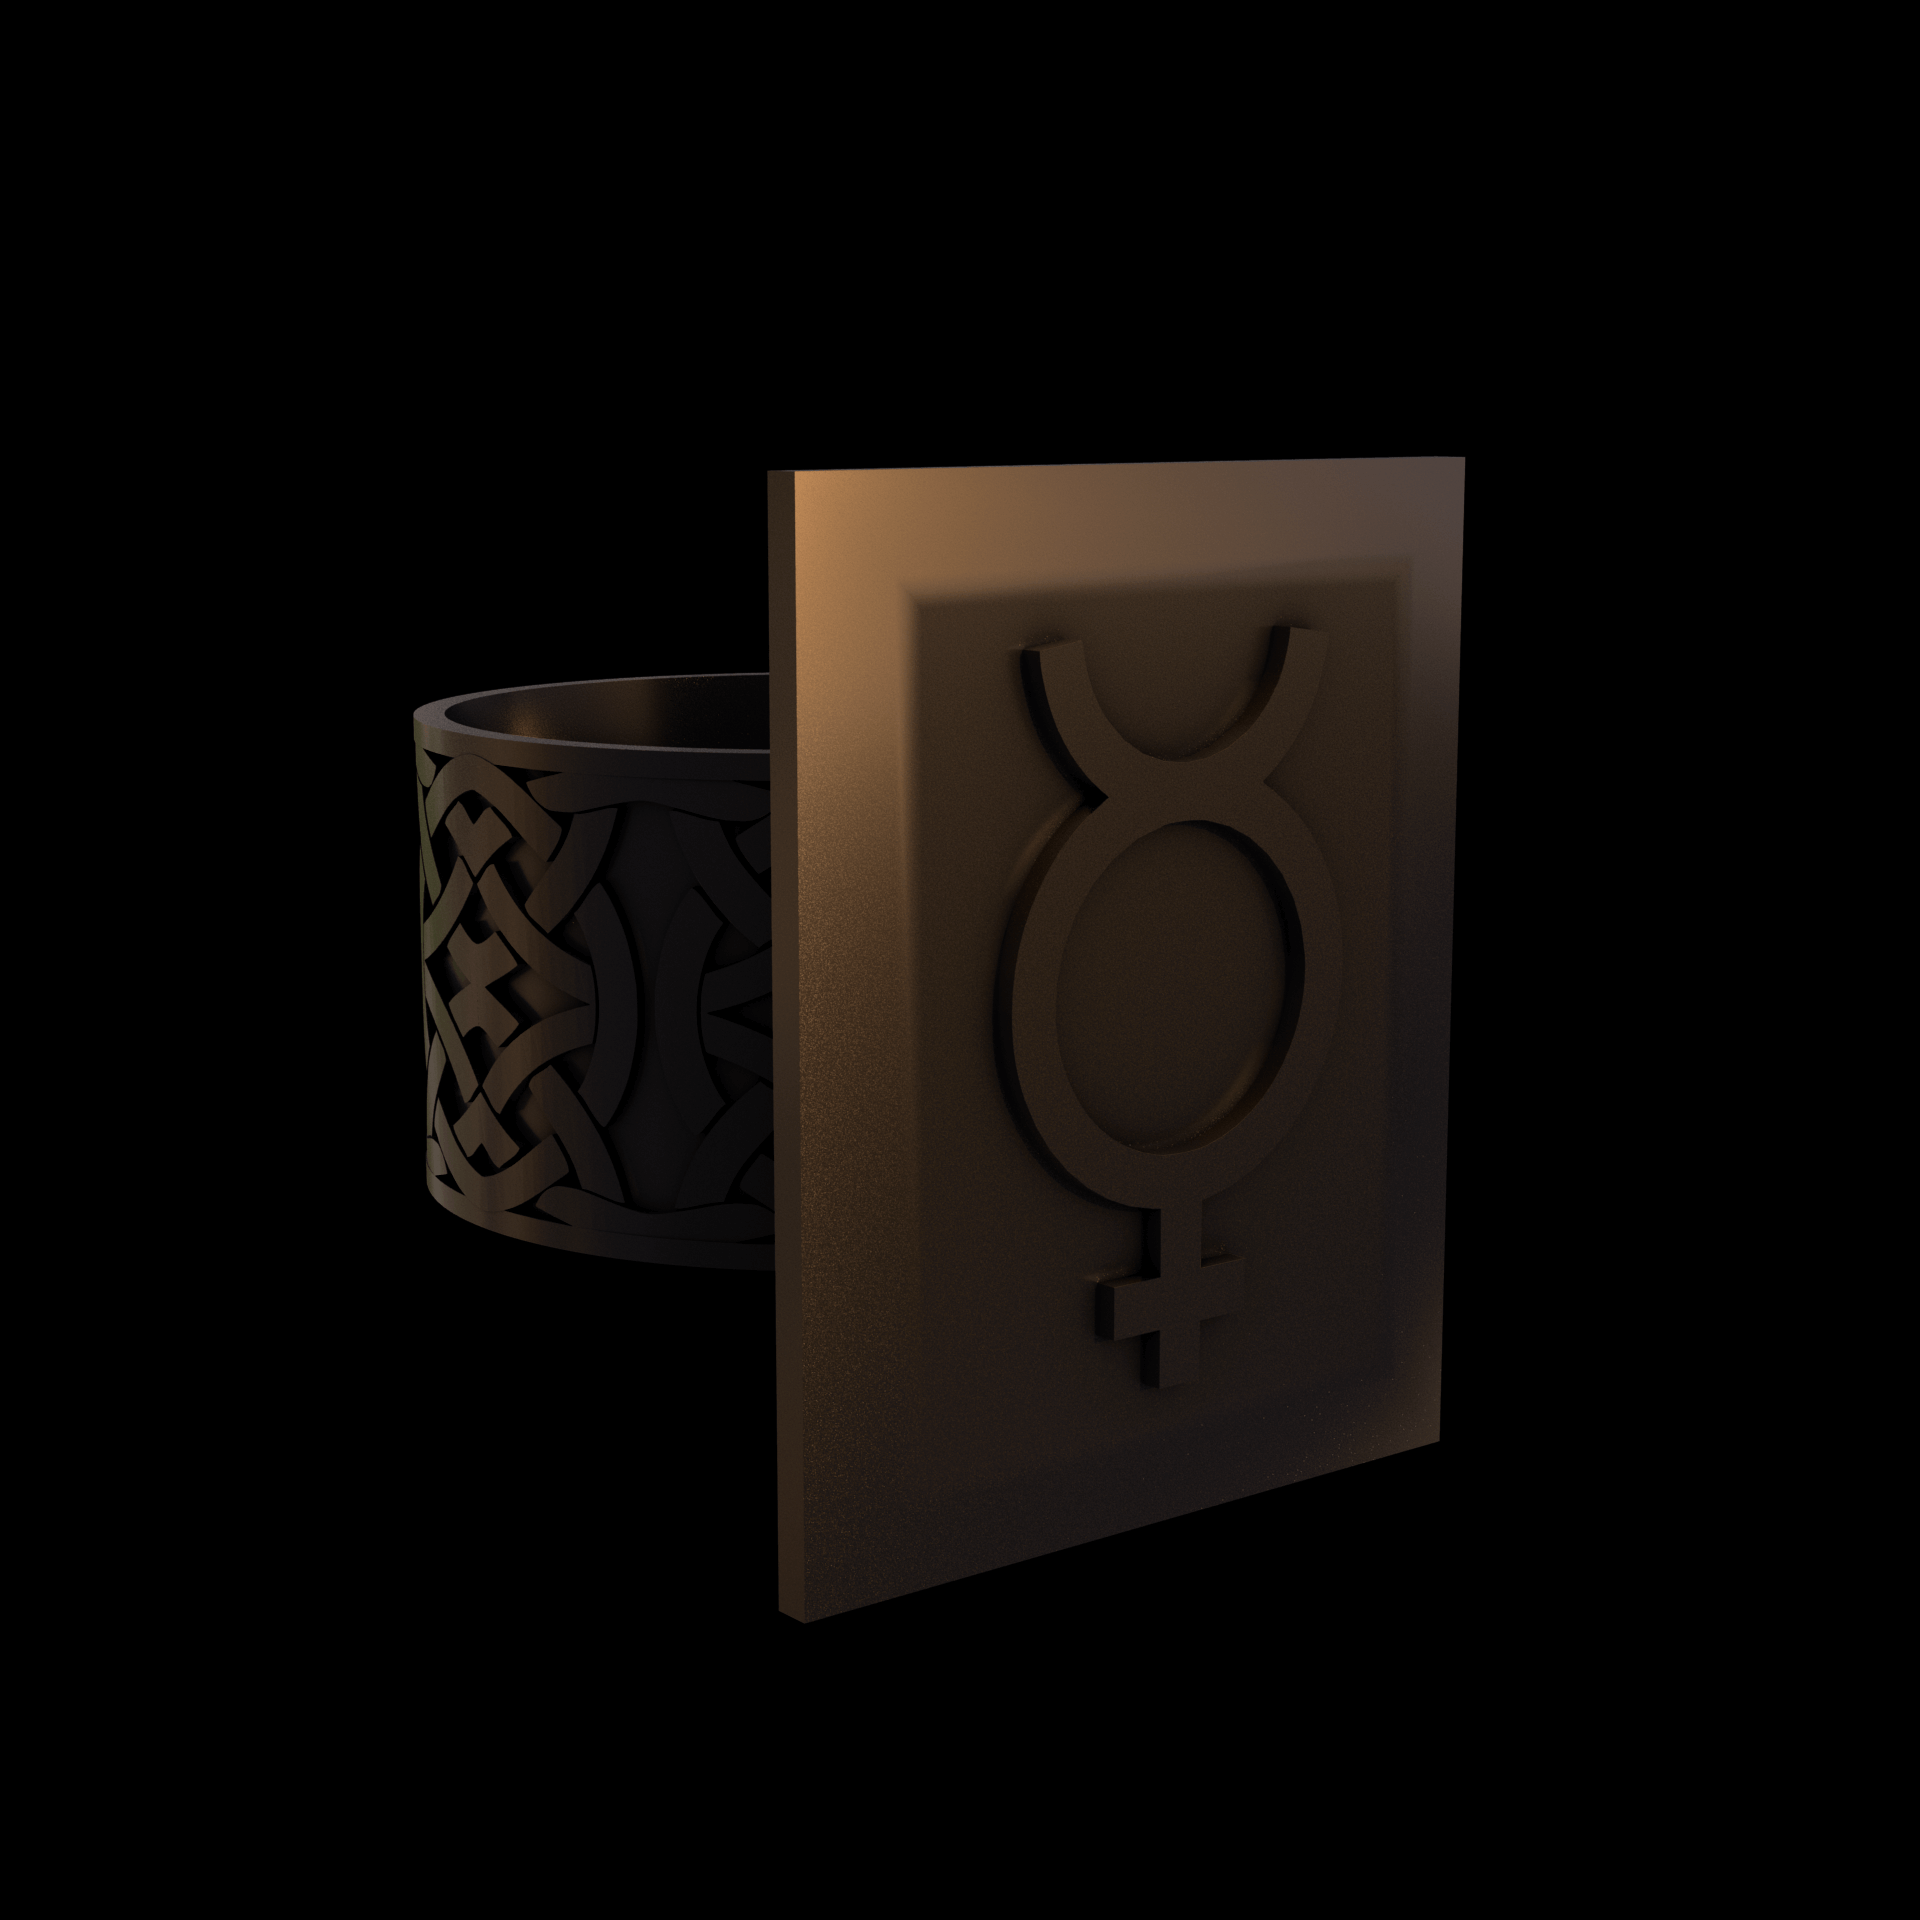 Bronze infused 420 stainless steel, manufactured using 3D printing, polished and enrobed in 24k gold with a mild sheen, with visible print lines.